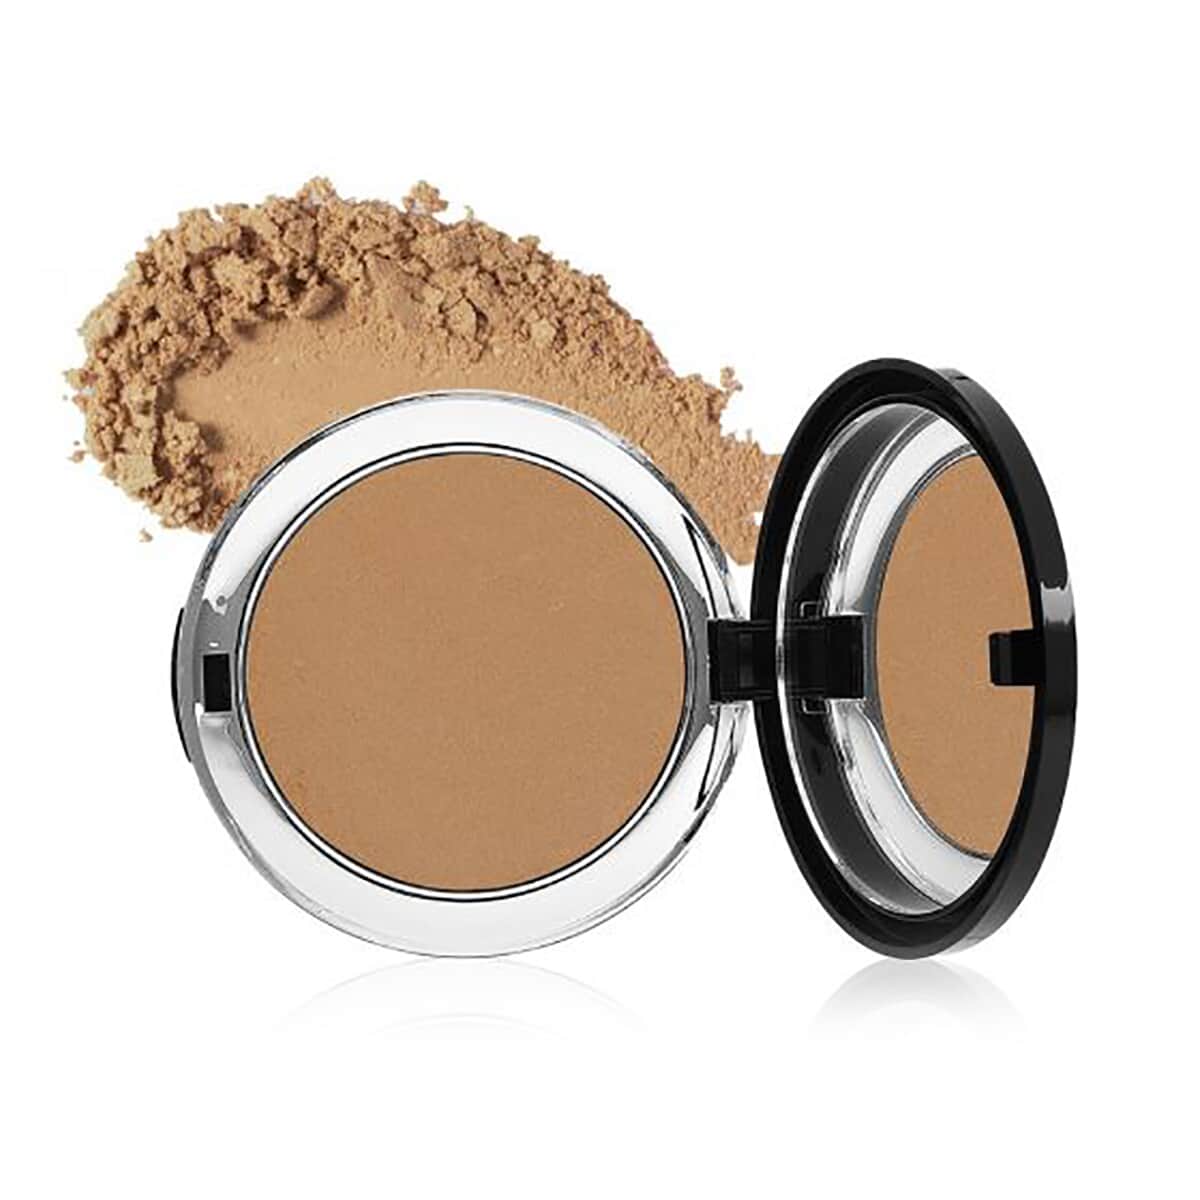 Bellapierre Cosmetics Compact Foundation- Brown Sugar (Ships in 8-10 Business Days) image number 0